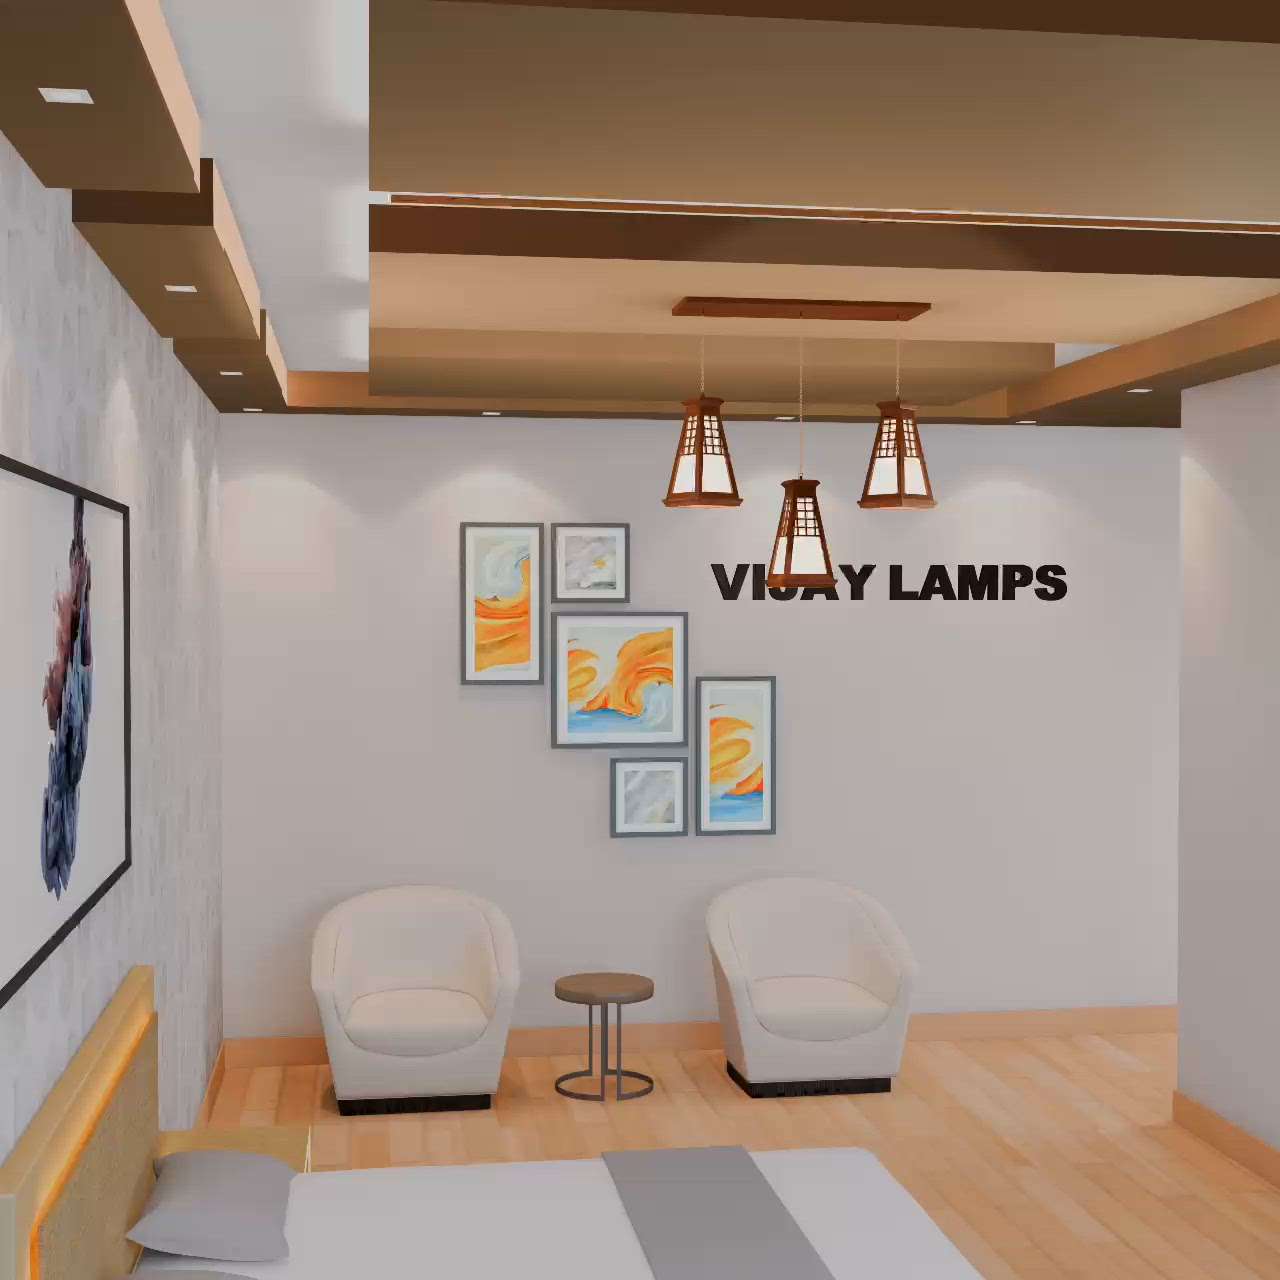 Wooden lamps manufacturers and suppliers since 1994

#homedecor #homelighting #woodlamps #walllamps #TeakWoodDoors #teak_wood #interior #interiors #Architectural&nterior